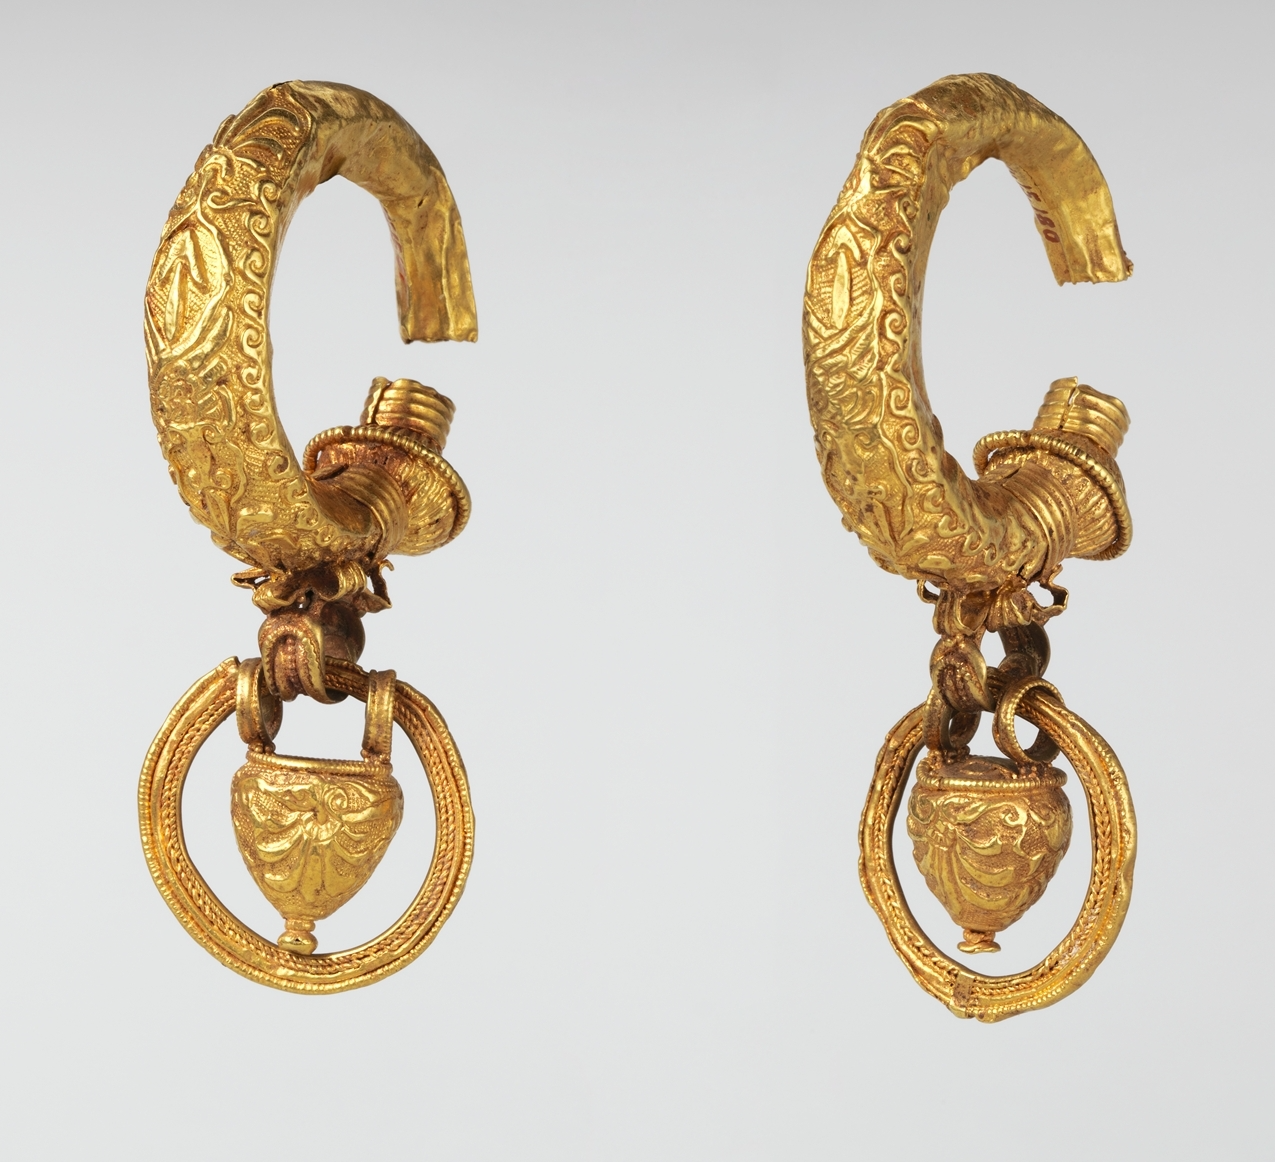 The pendant rings that hang from these hollow gold earrings are thought to have contained perfume. 4th-3rd century B.C., Metropolitan Museum of Art.